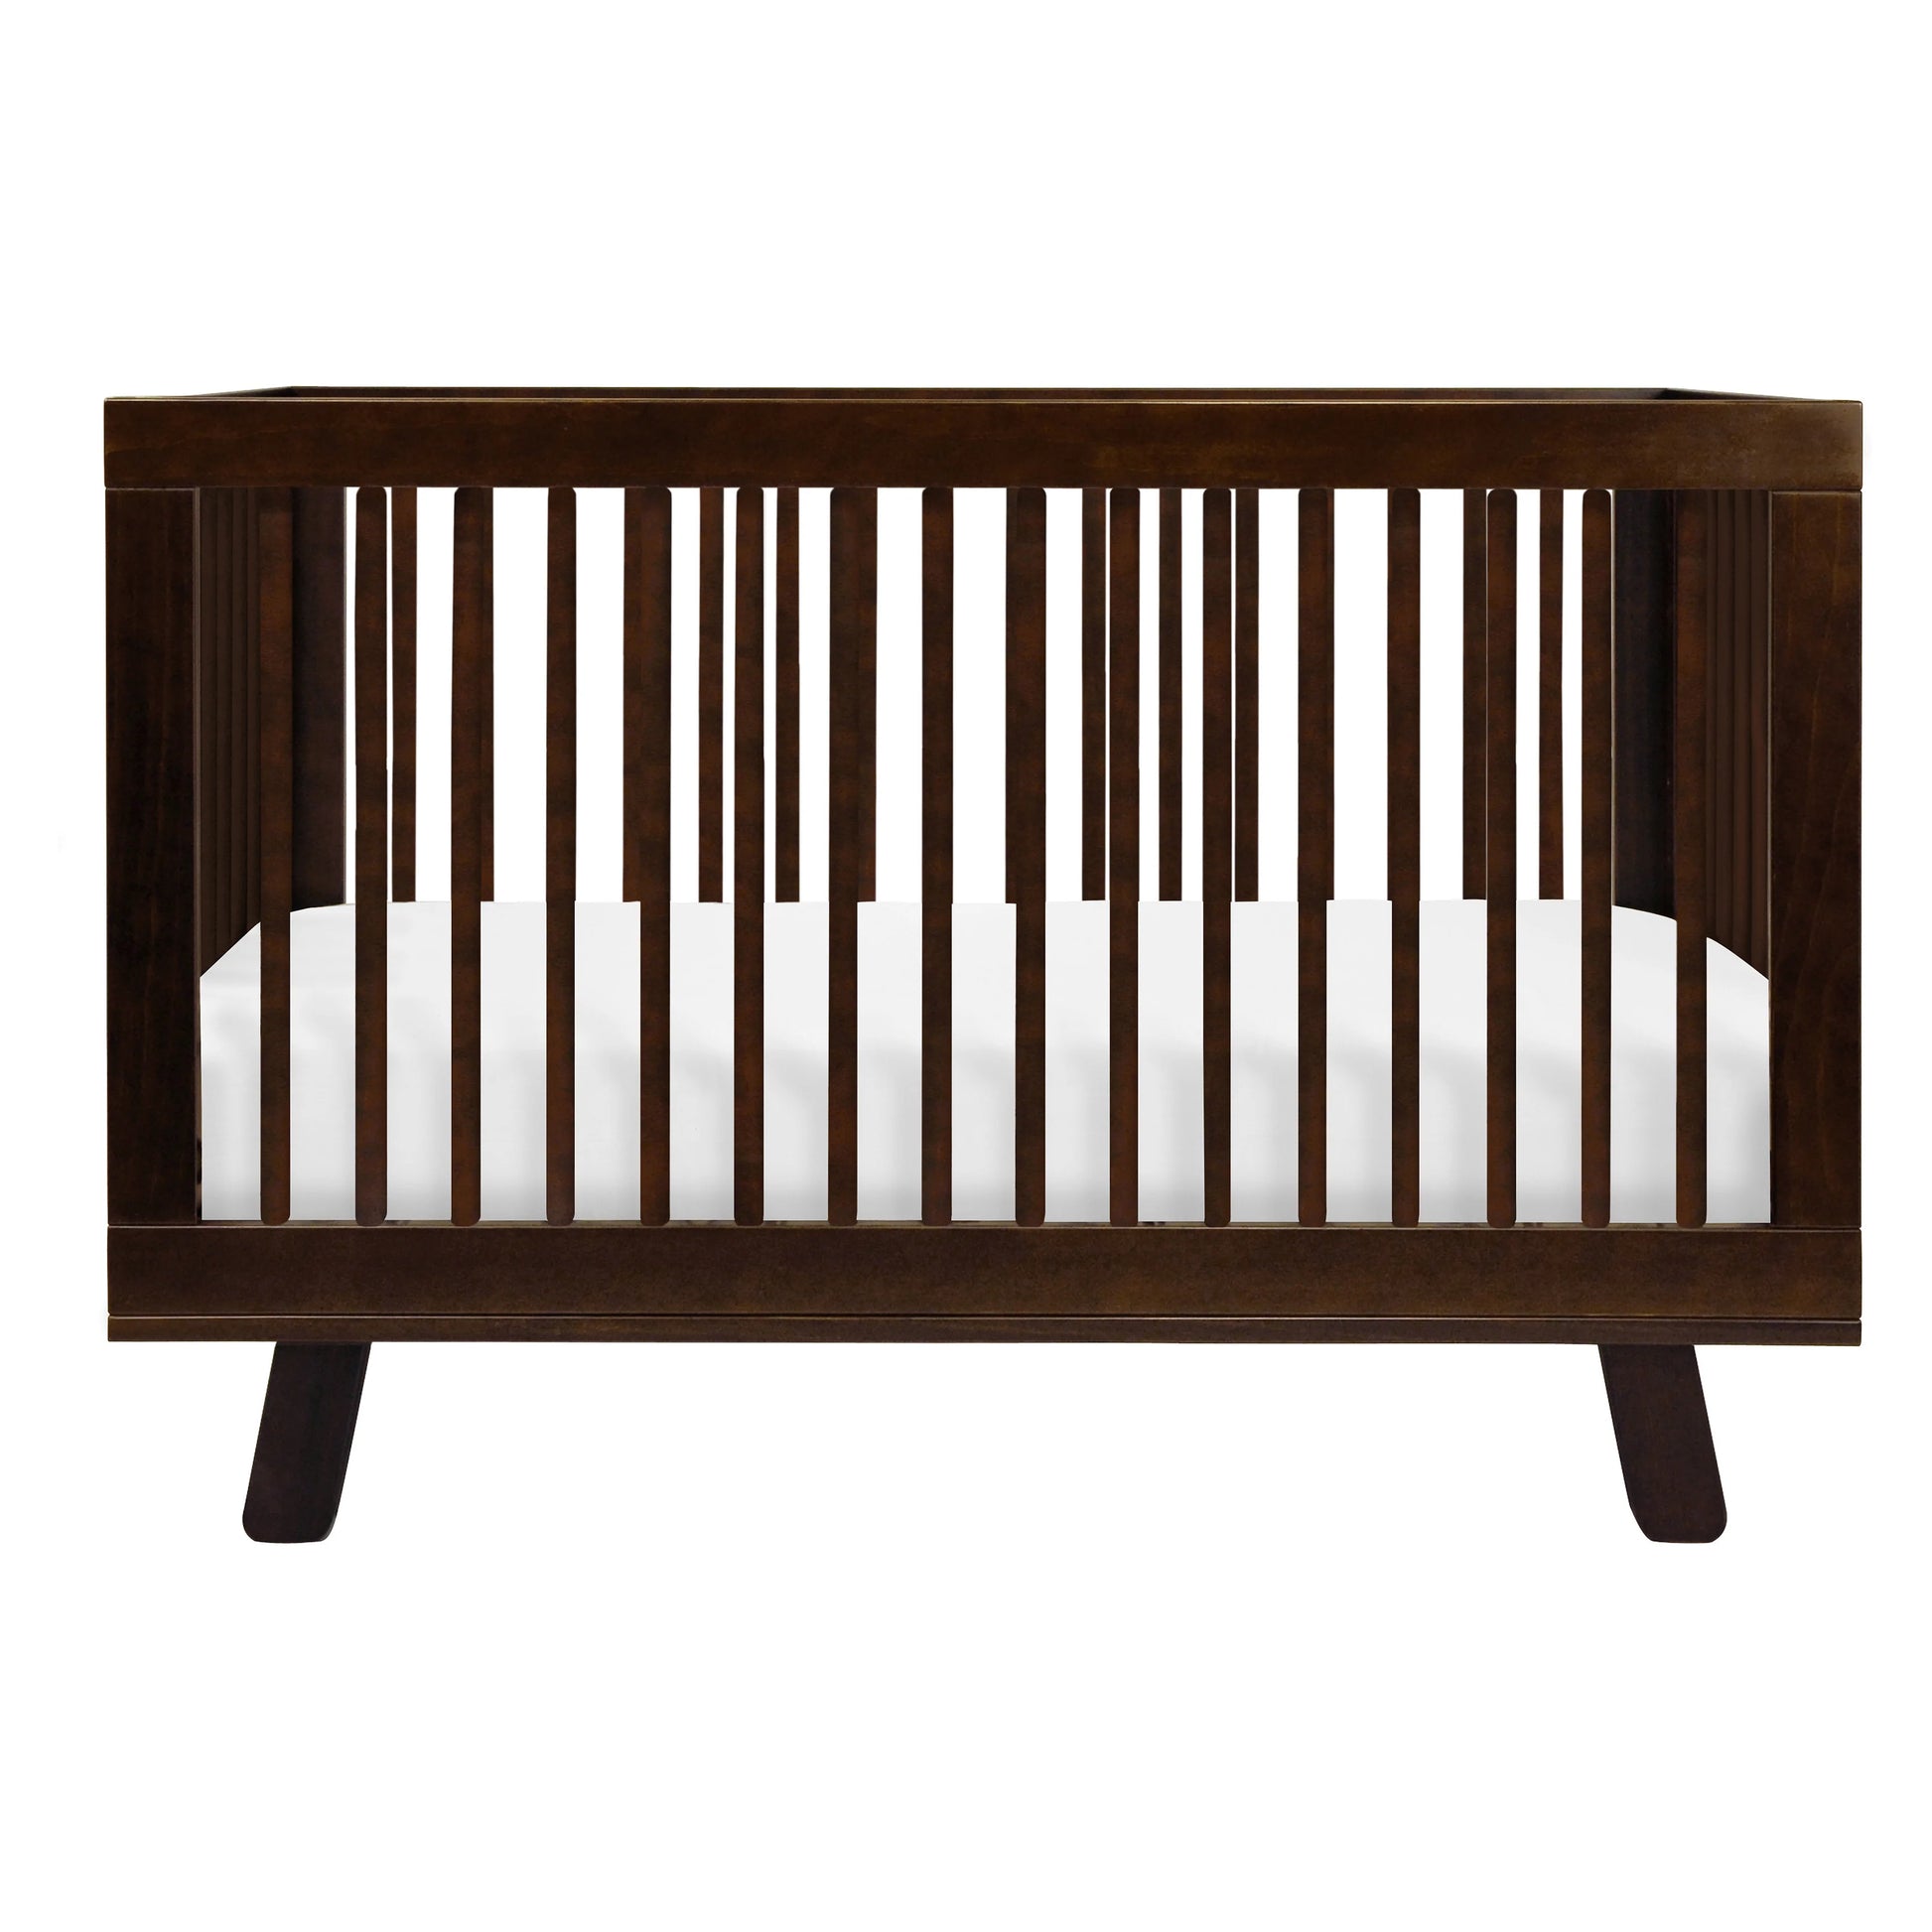 Babyletto Hudson 3-in-1 Convertible Crib with Toddler Bed Conversion Kit - espresso